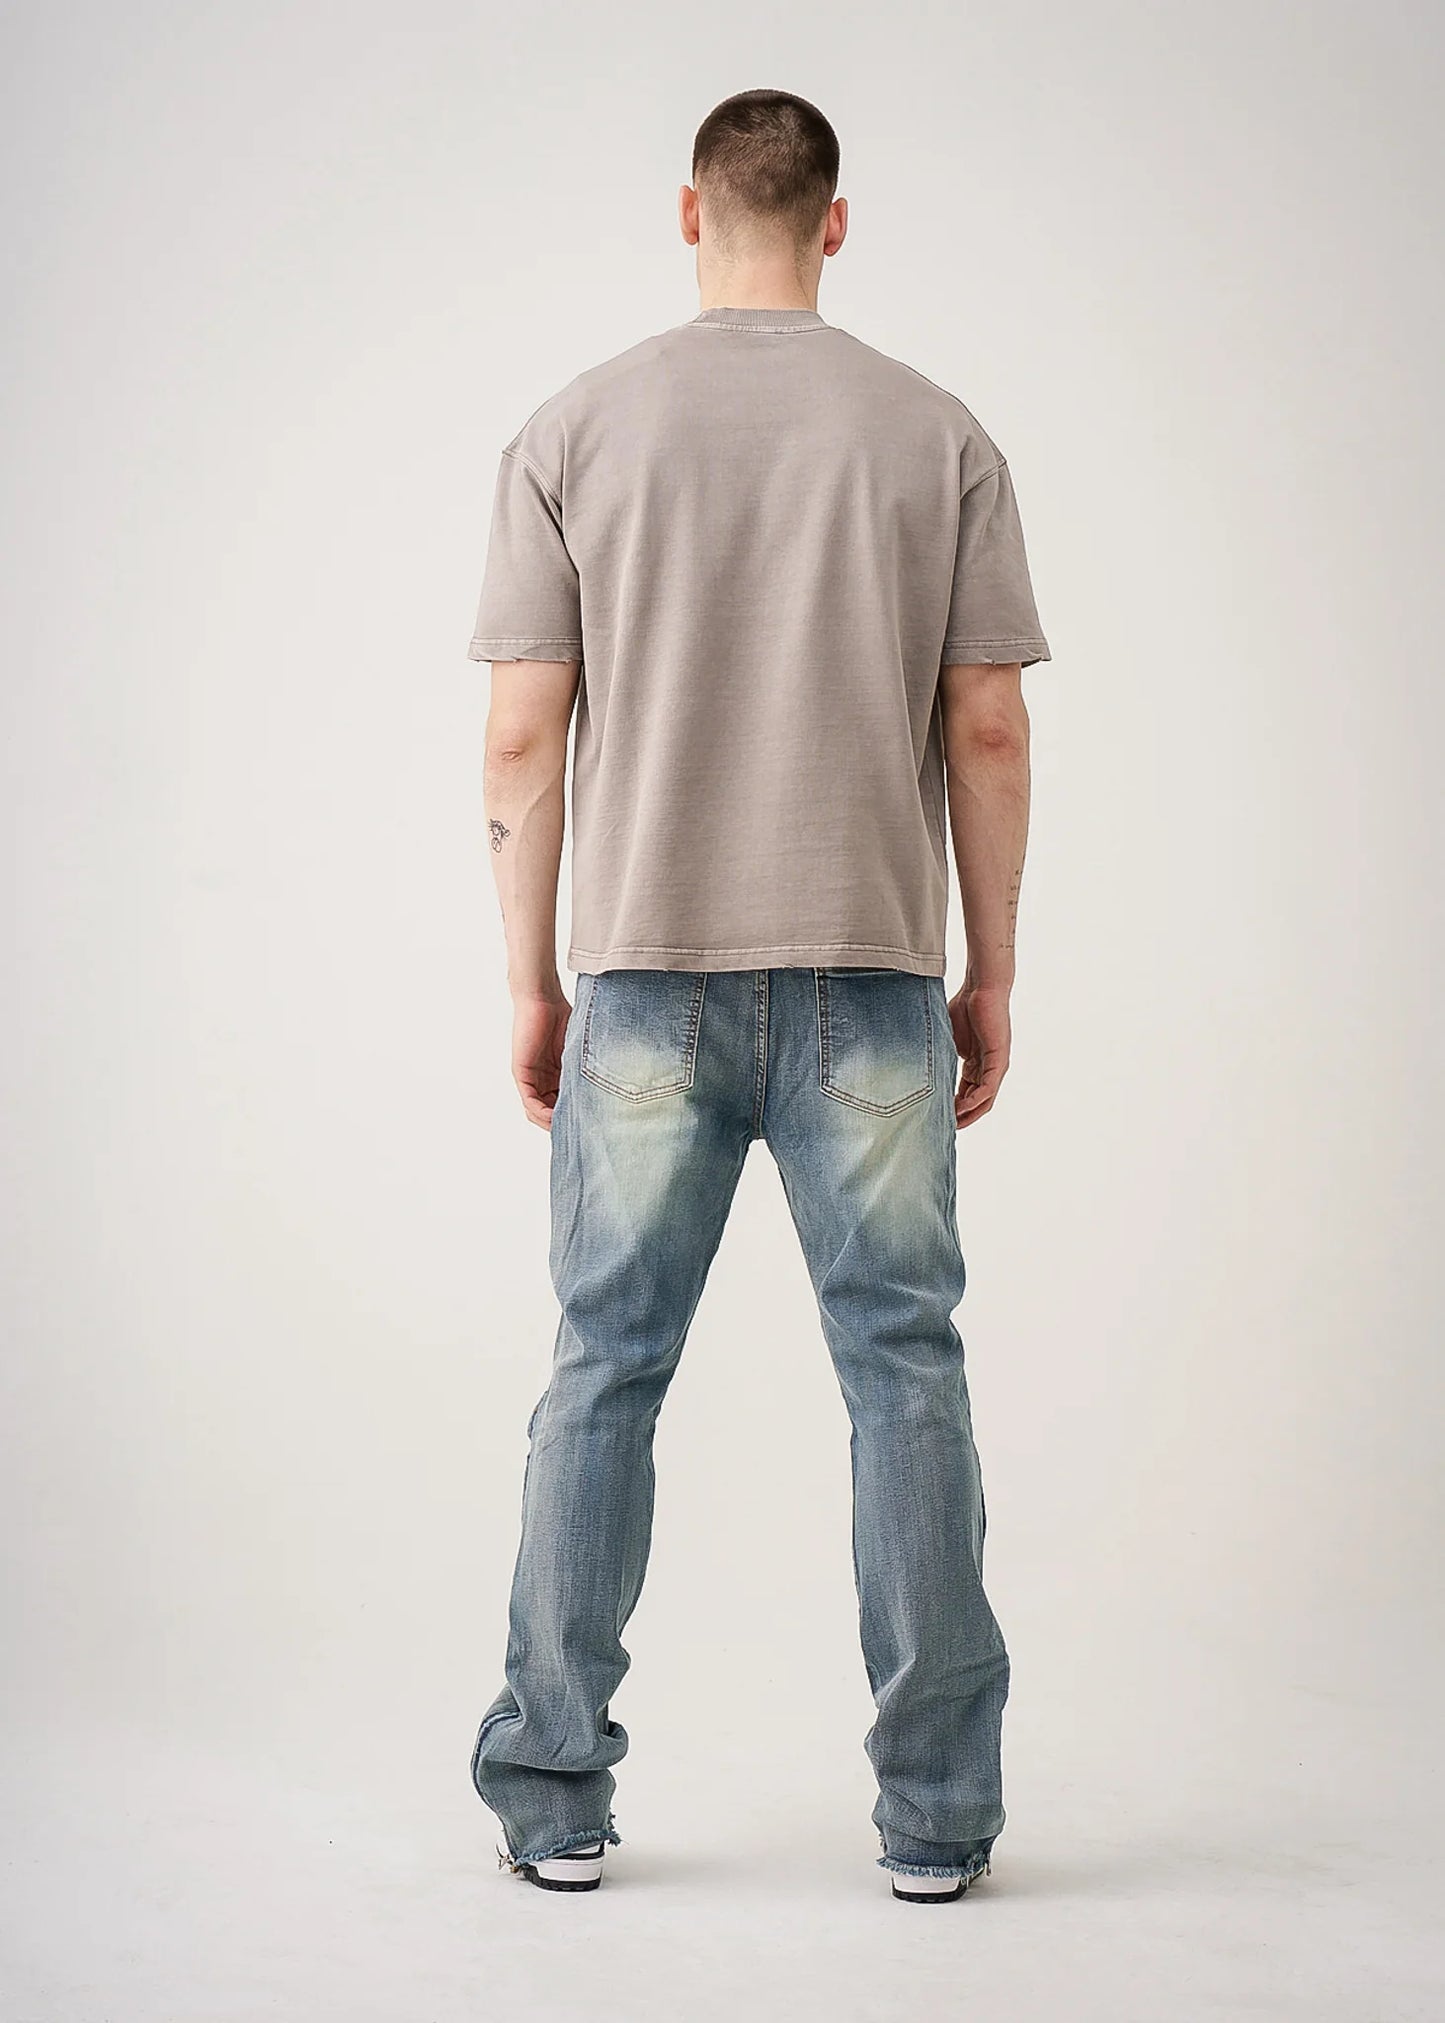 Gray 10 oz Oversized Garment Dye French Terry Distressed T-Shirt